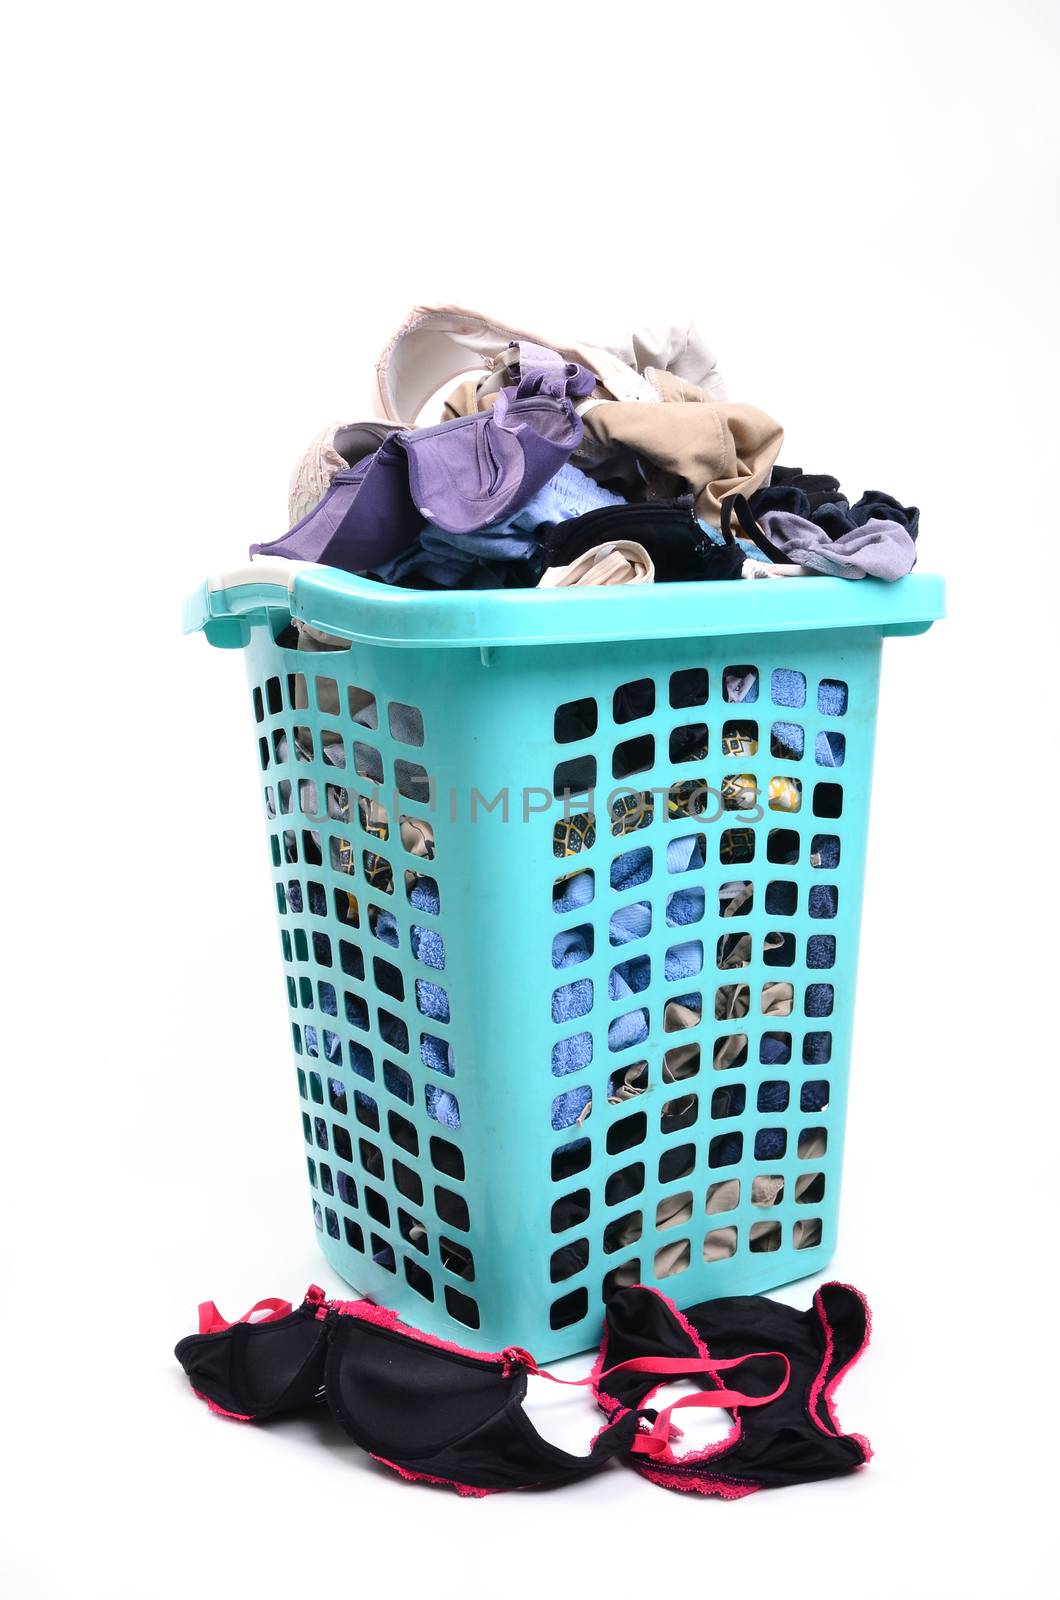 unwashed cloth in the basket on white background